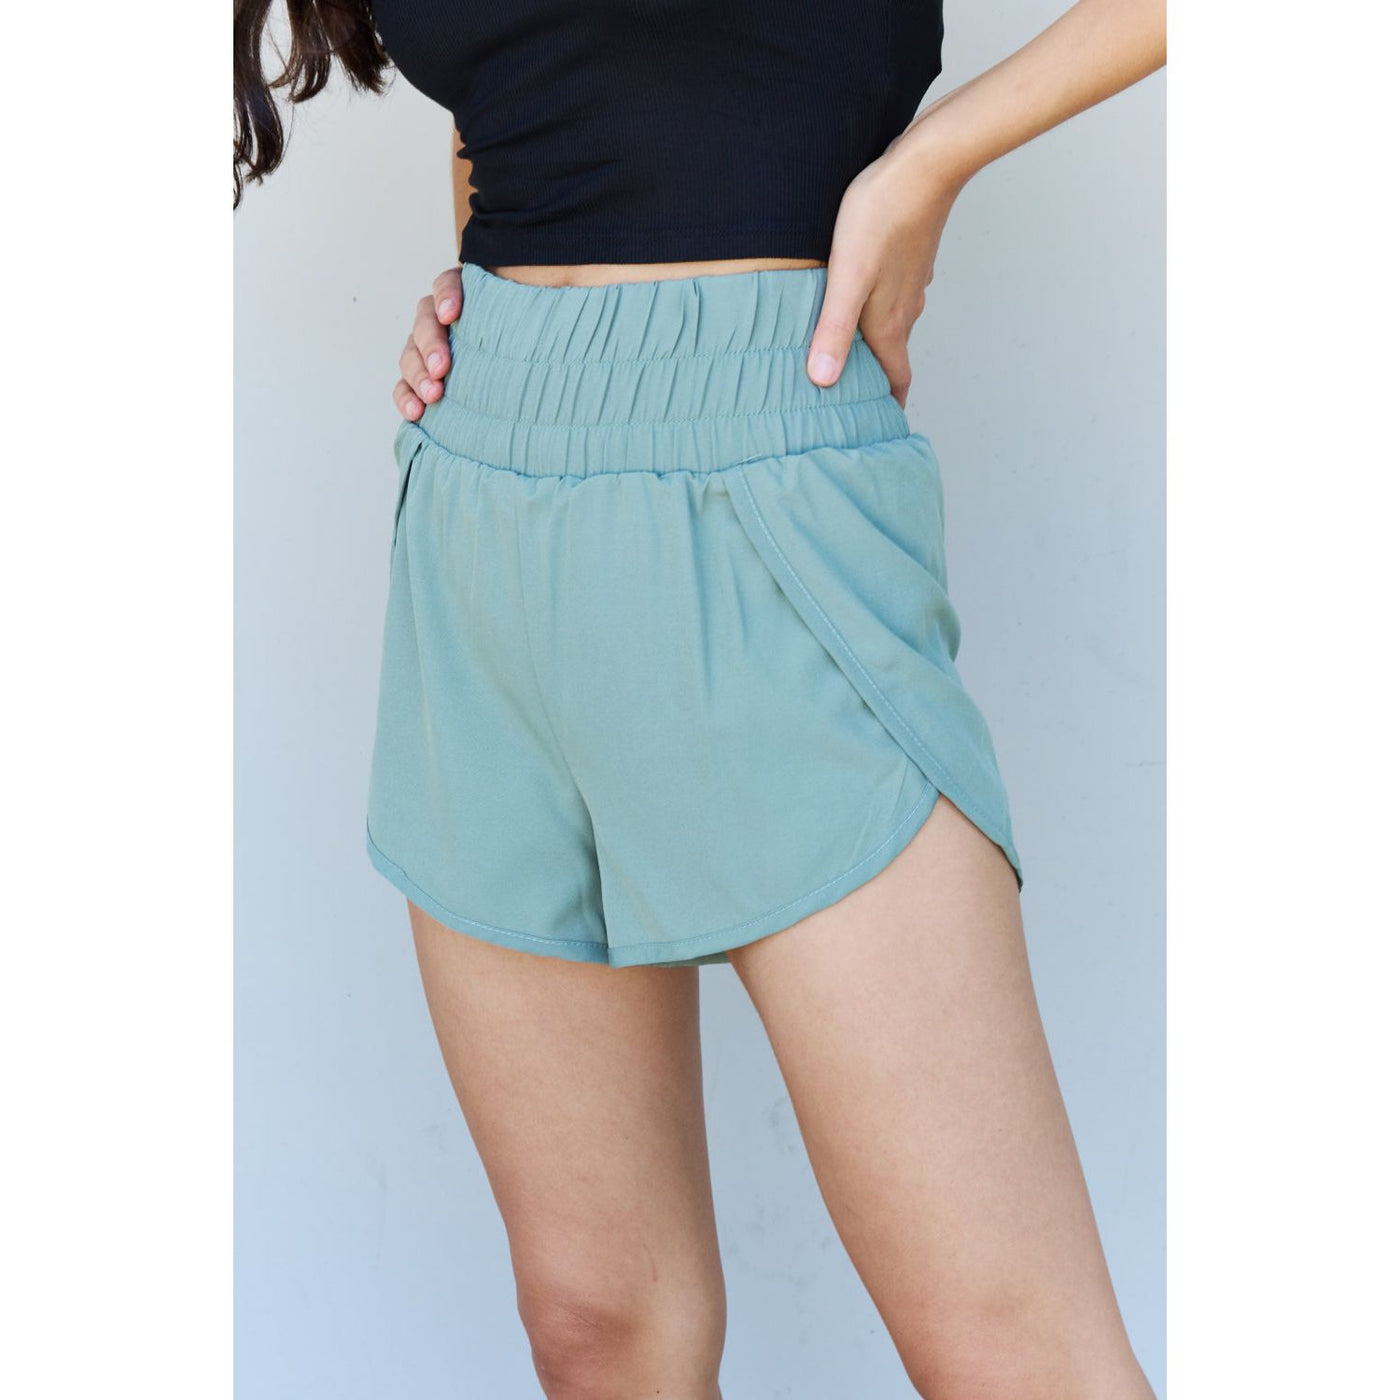 Mary Anne Pastel Blue High Waistband Active Shorts